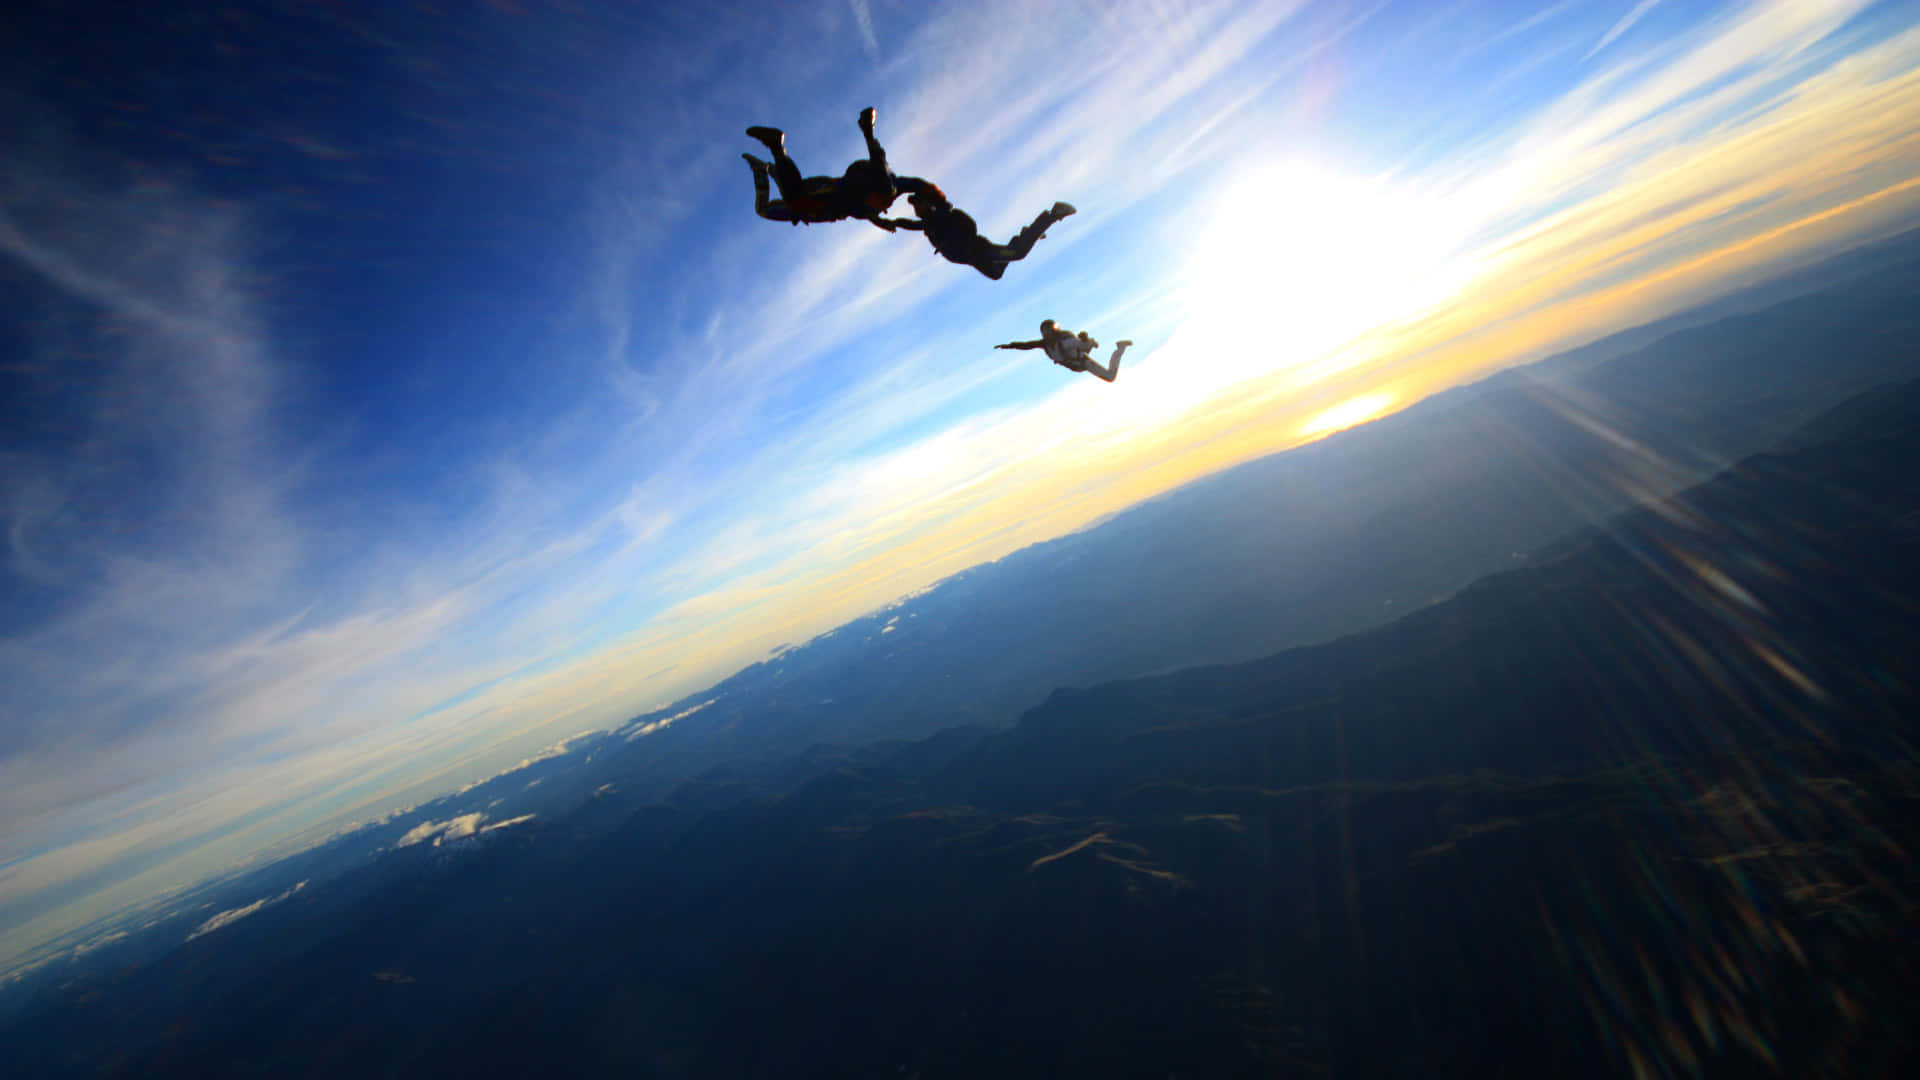 Skydiving Sunset Image Picture